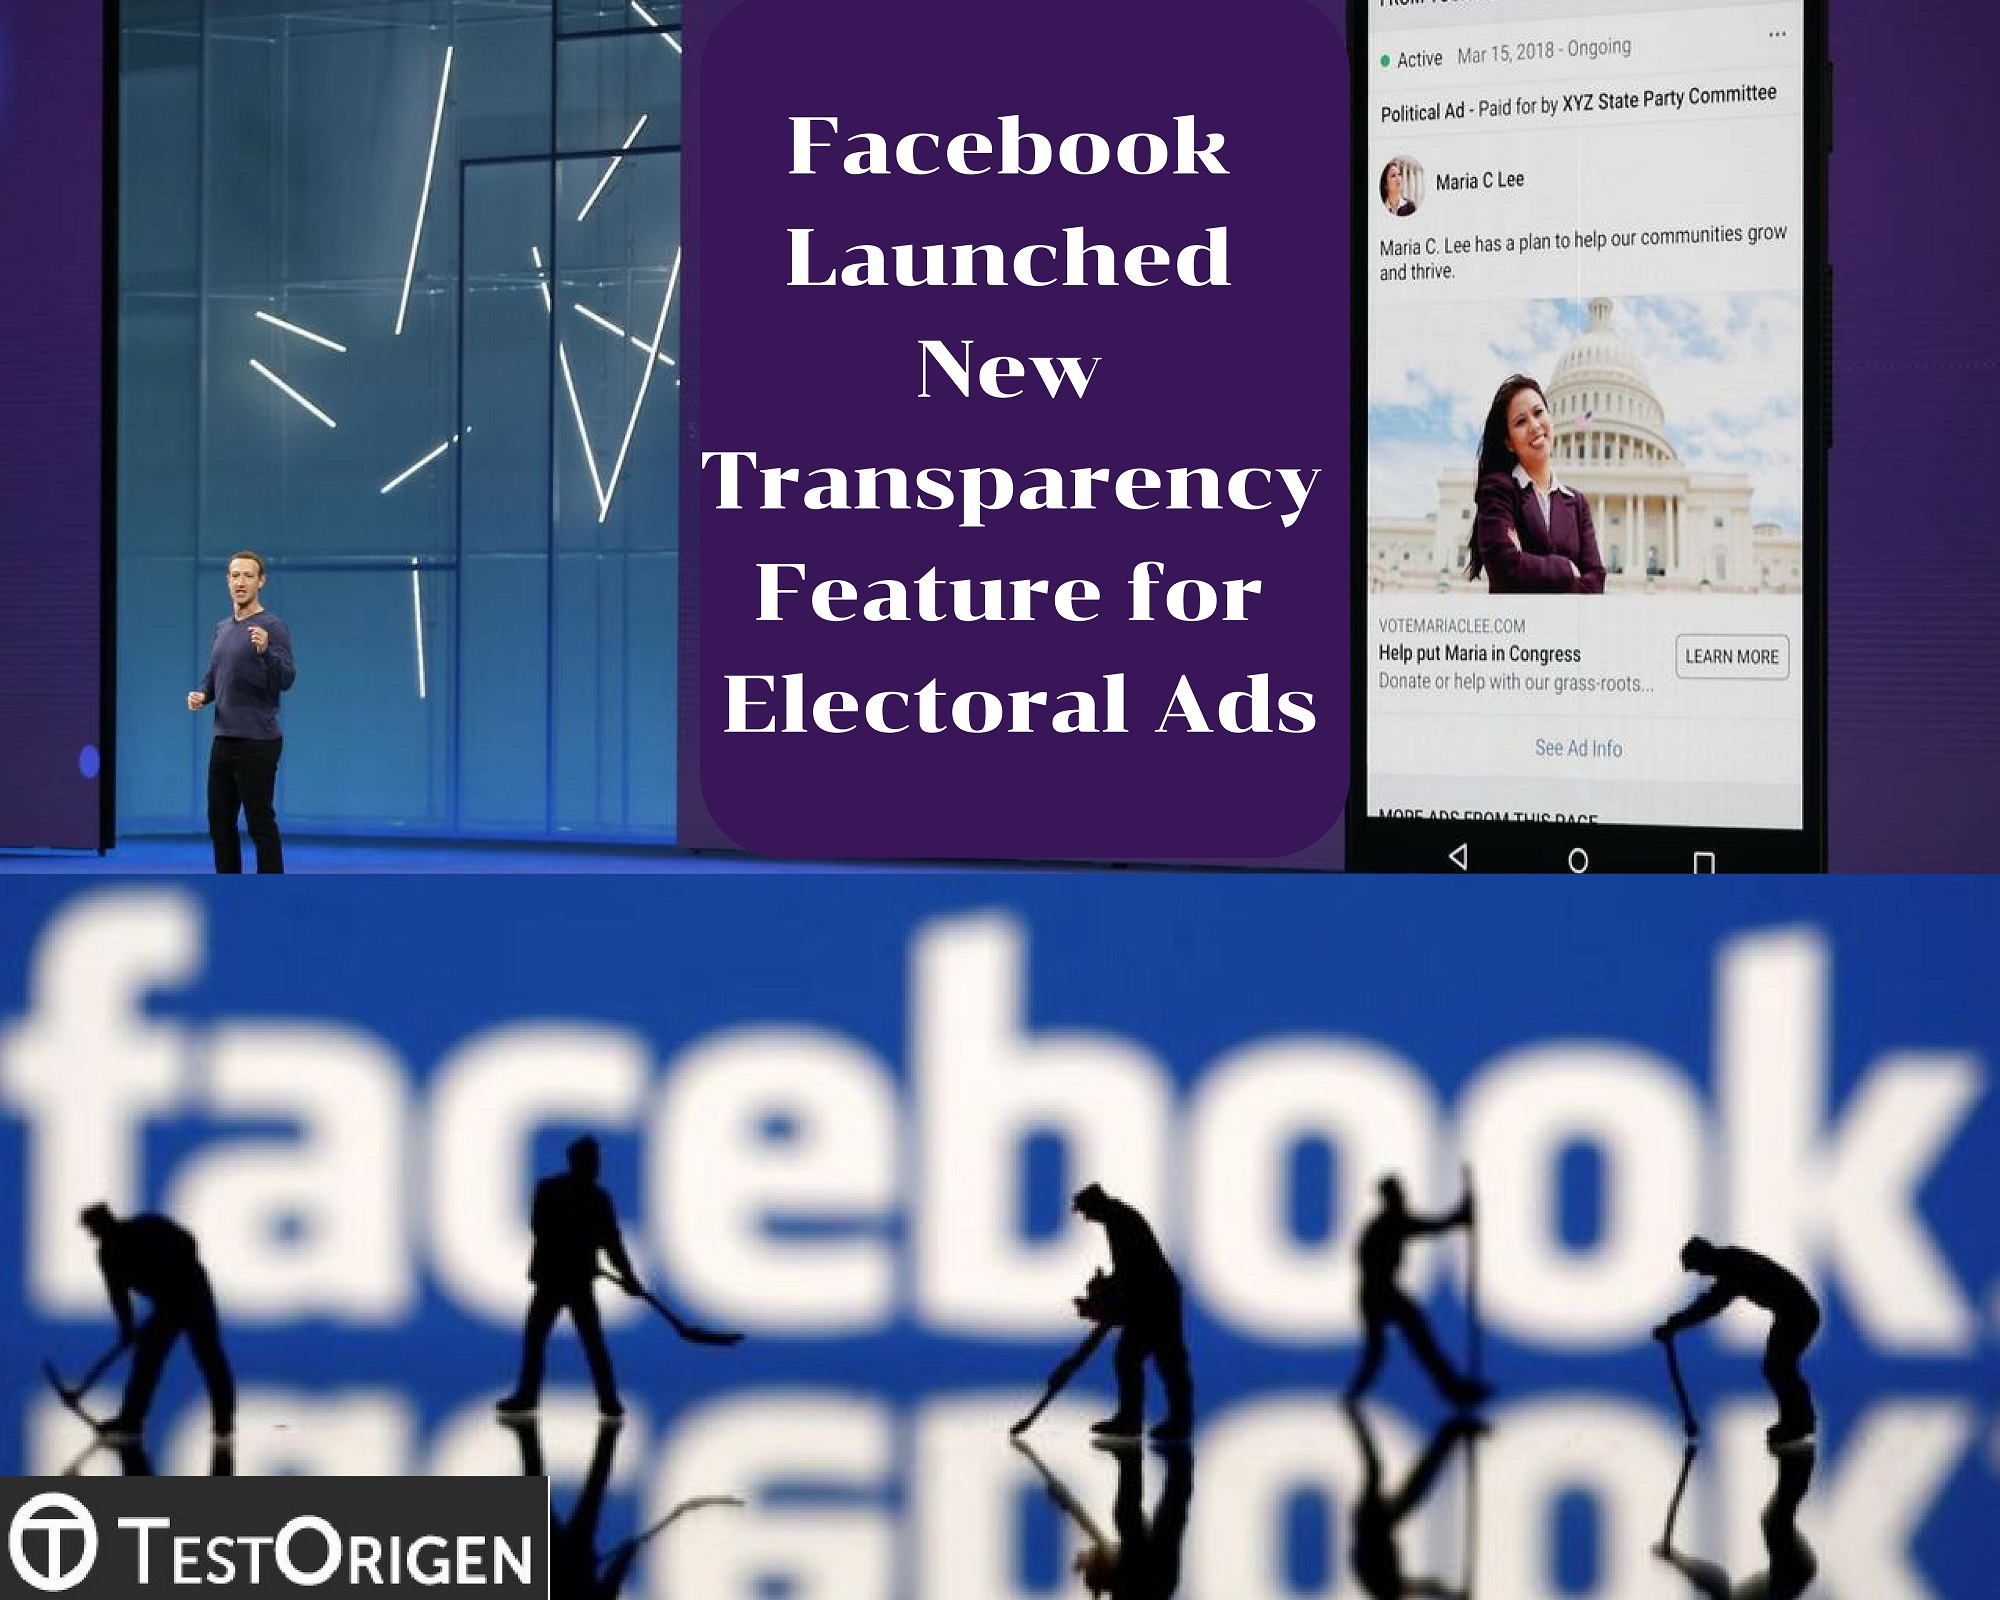 Facebook Launched New Transparency Feature for Electoral Ads